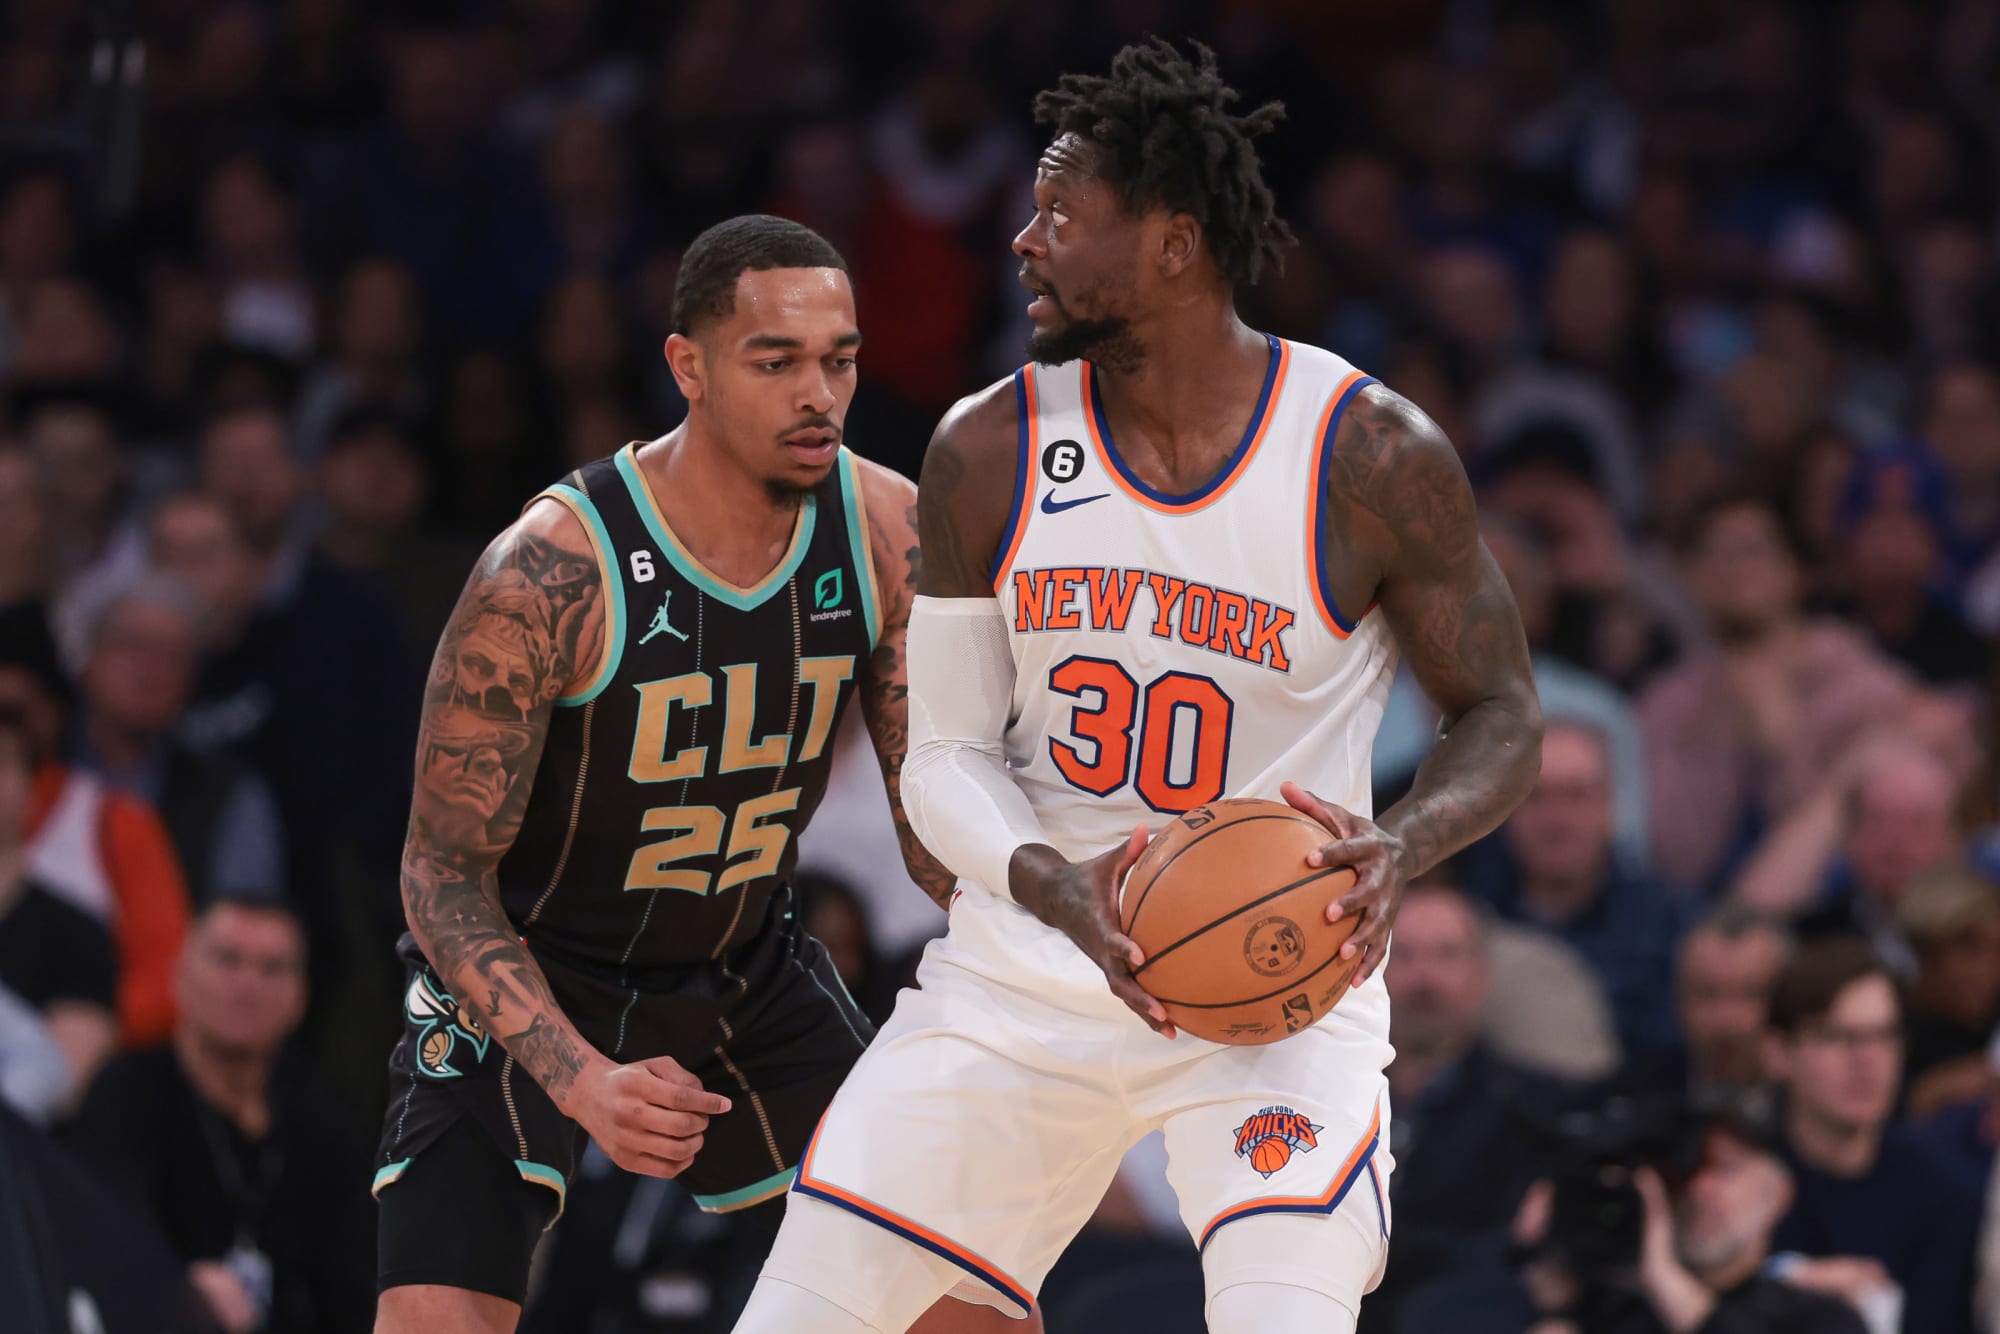 Jalen Brunson's absence exposes a weakness for the New York Knicks